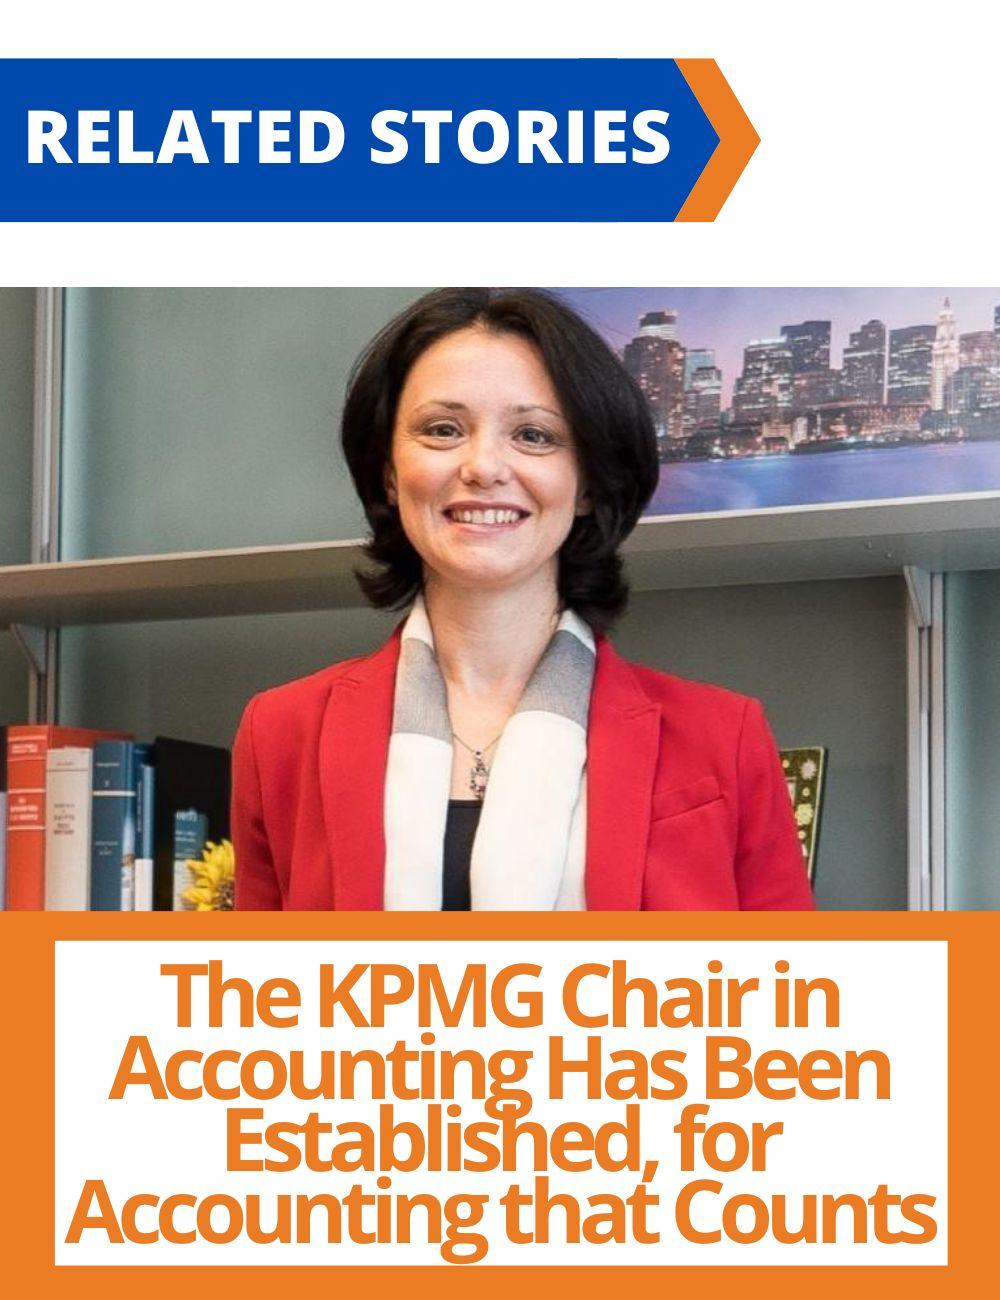 Link to related stories. Image: Professor Prencipe. Story headline: The KPMG Chair in Accounting Has Been Established, for Accounting that Counts